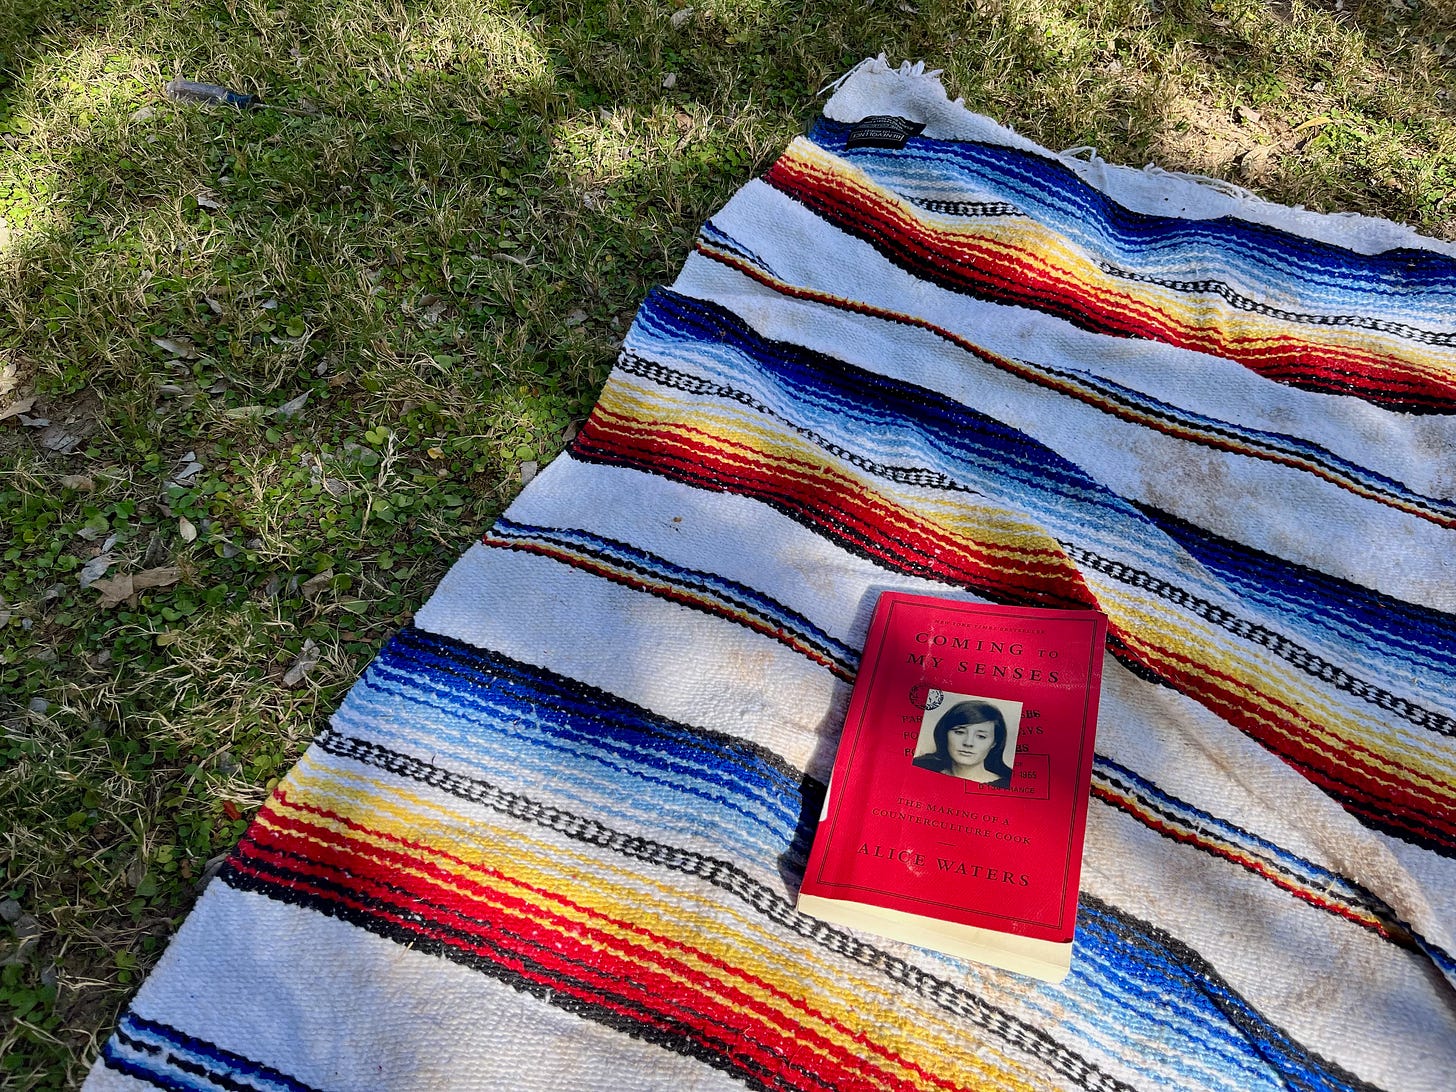 a picnic blanket on the ground with my copy of Coming to my Senses by Alice Waters resting on top